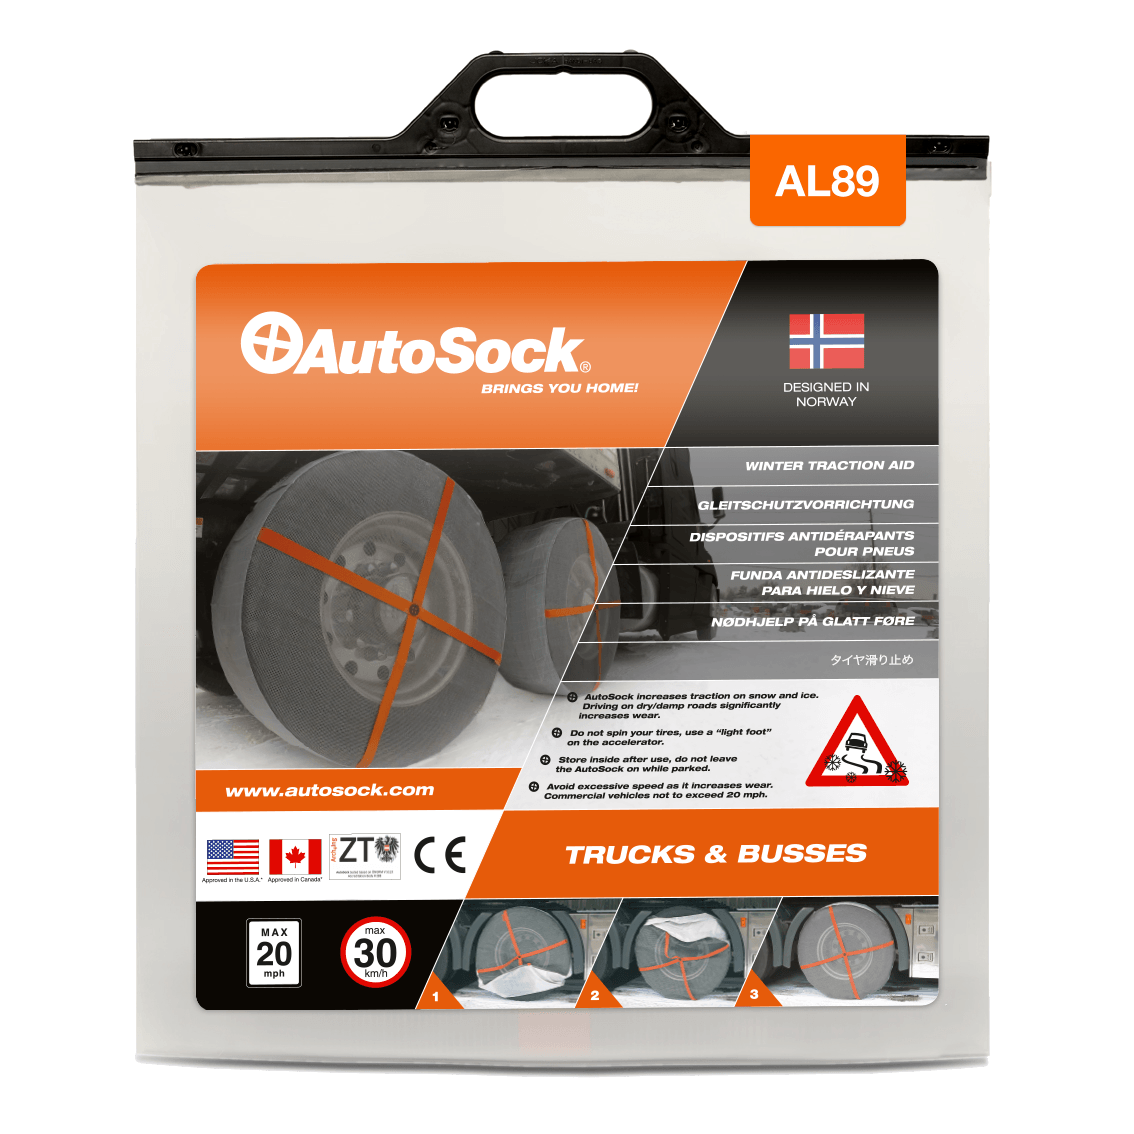 Product Packaging of AutoSock AL 89 AL89 for trucks (front view)